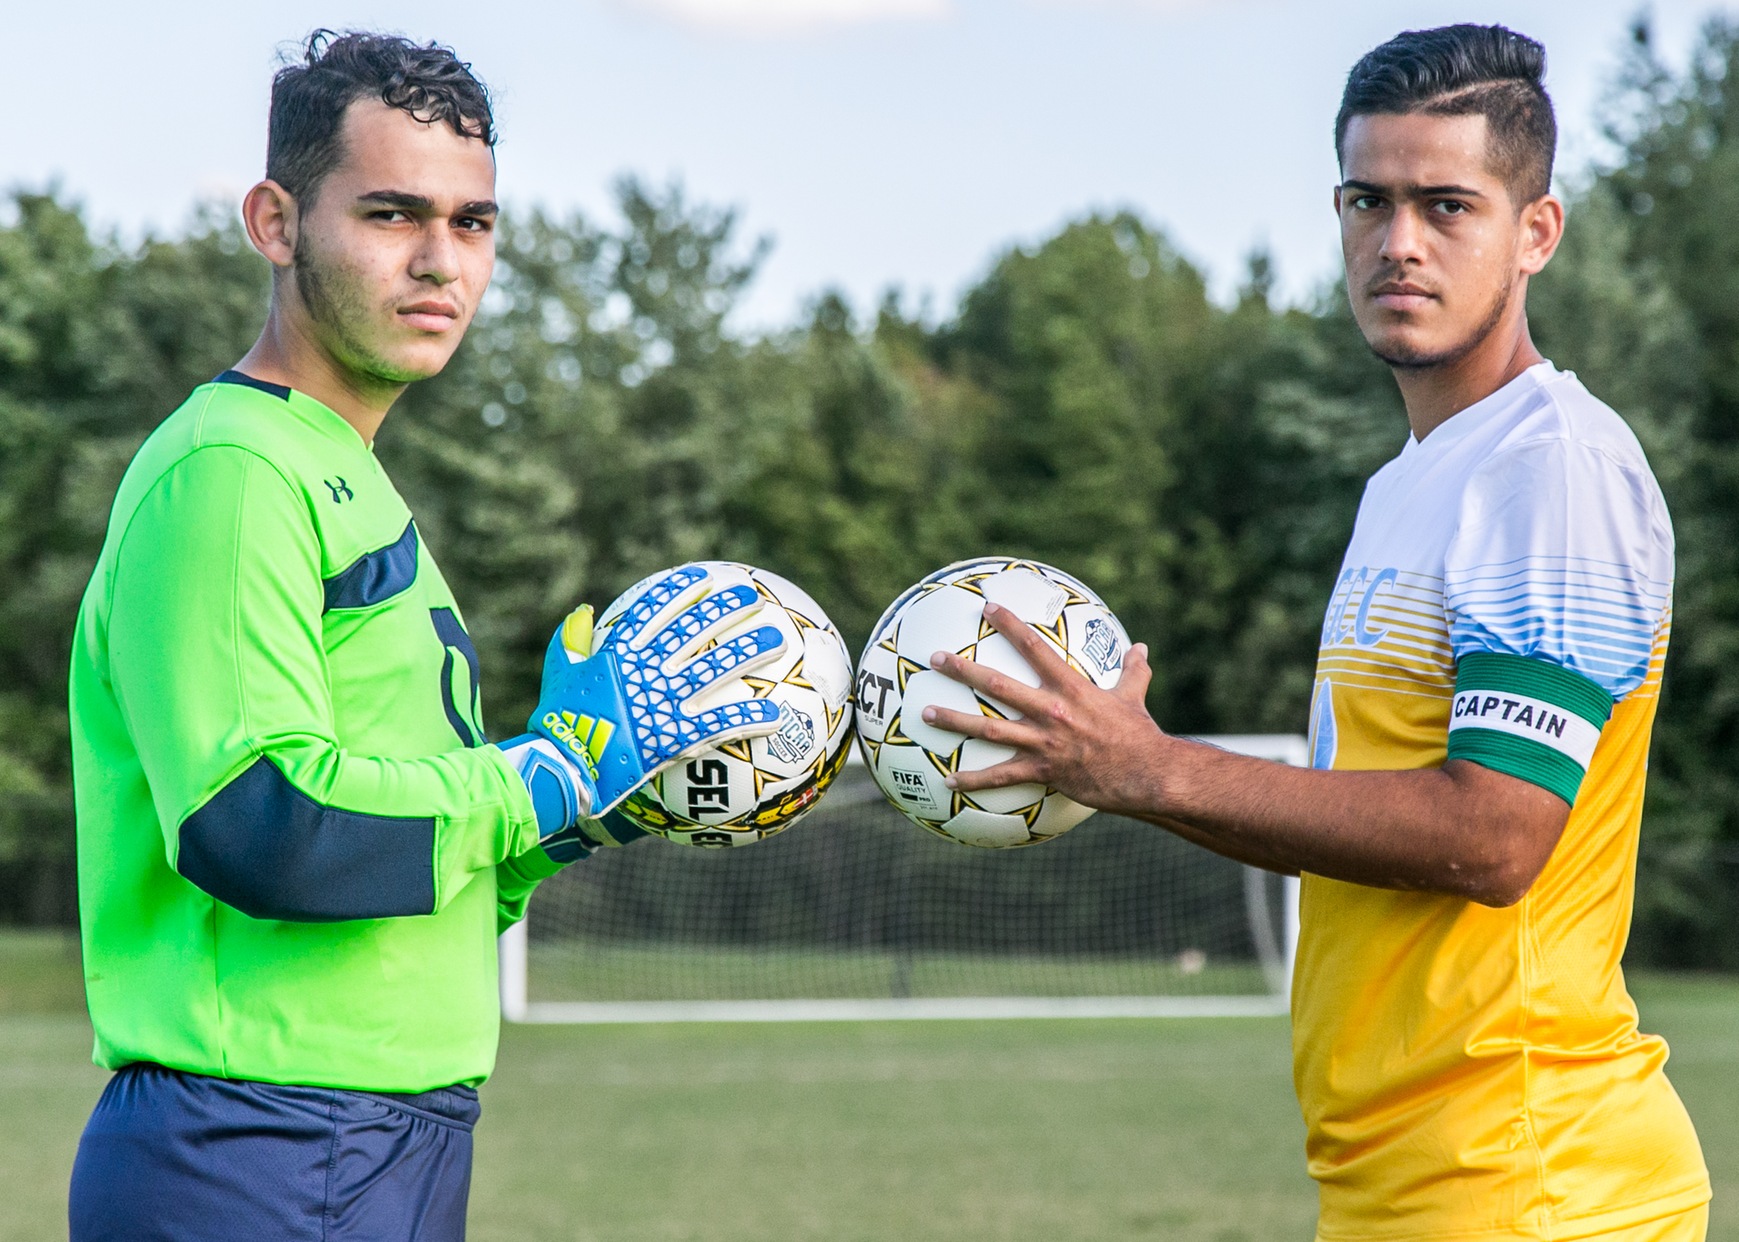 VIDEO - Men's Soccer Claros Brothers: A Story Of Soccer And Brotherly Love